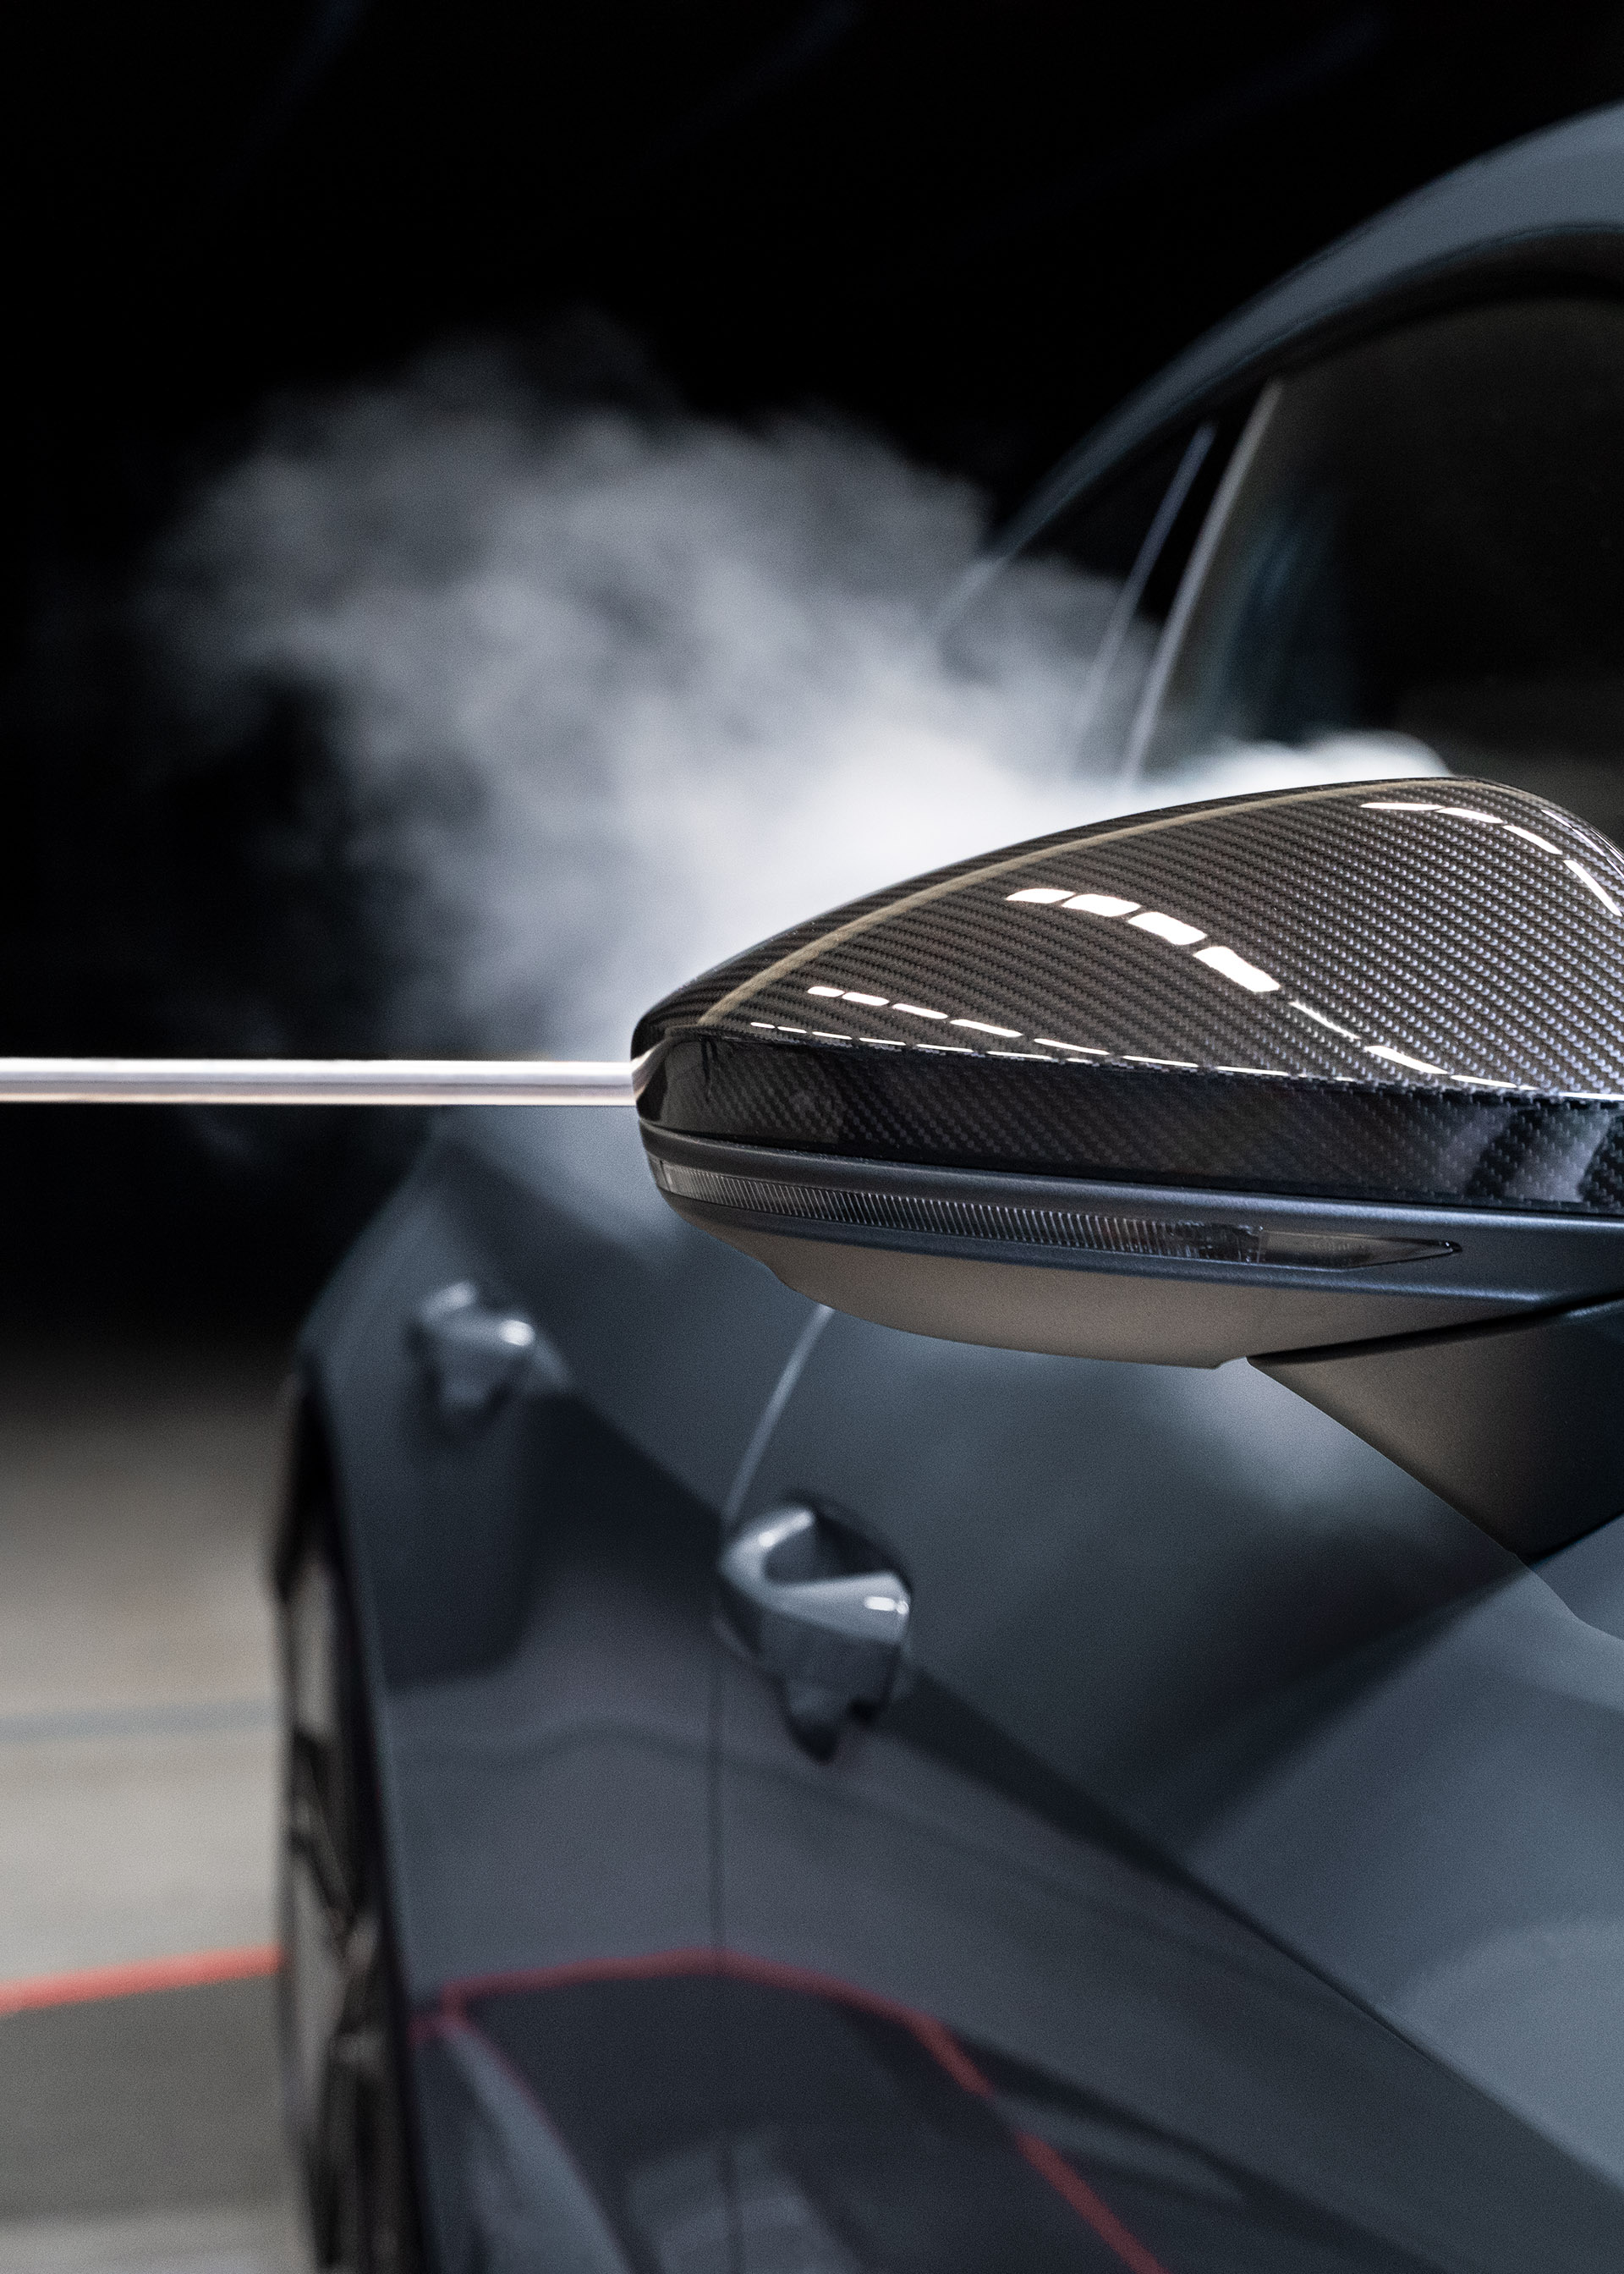 Smoke flows along the body of the Audi RS e-tron GT{ft_rs-e-tron-gt} after passing the exterior mirror.